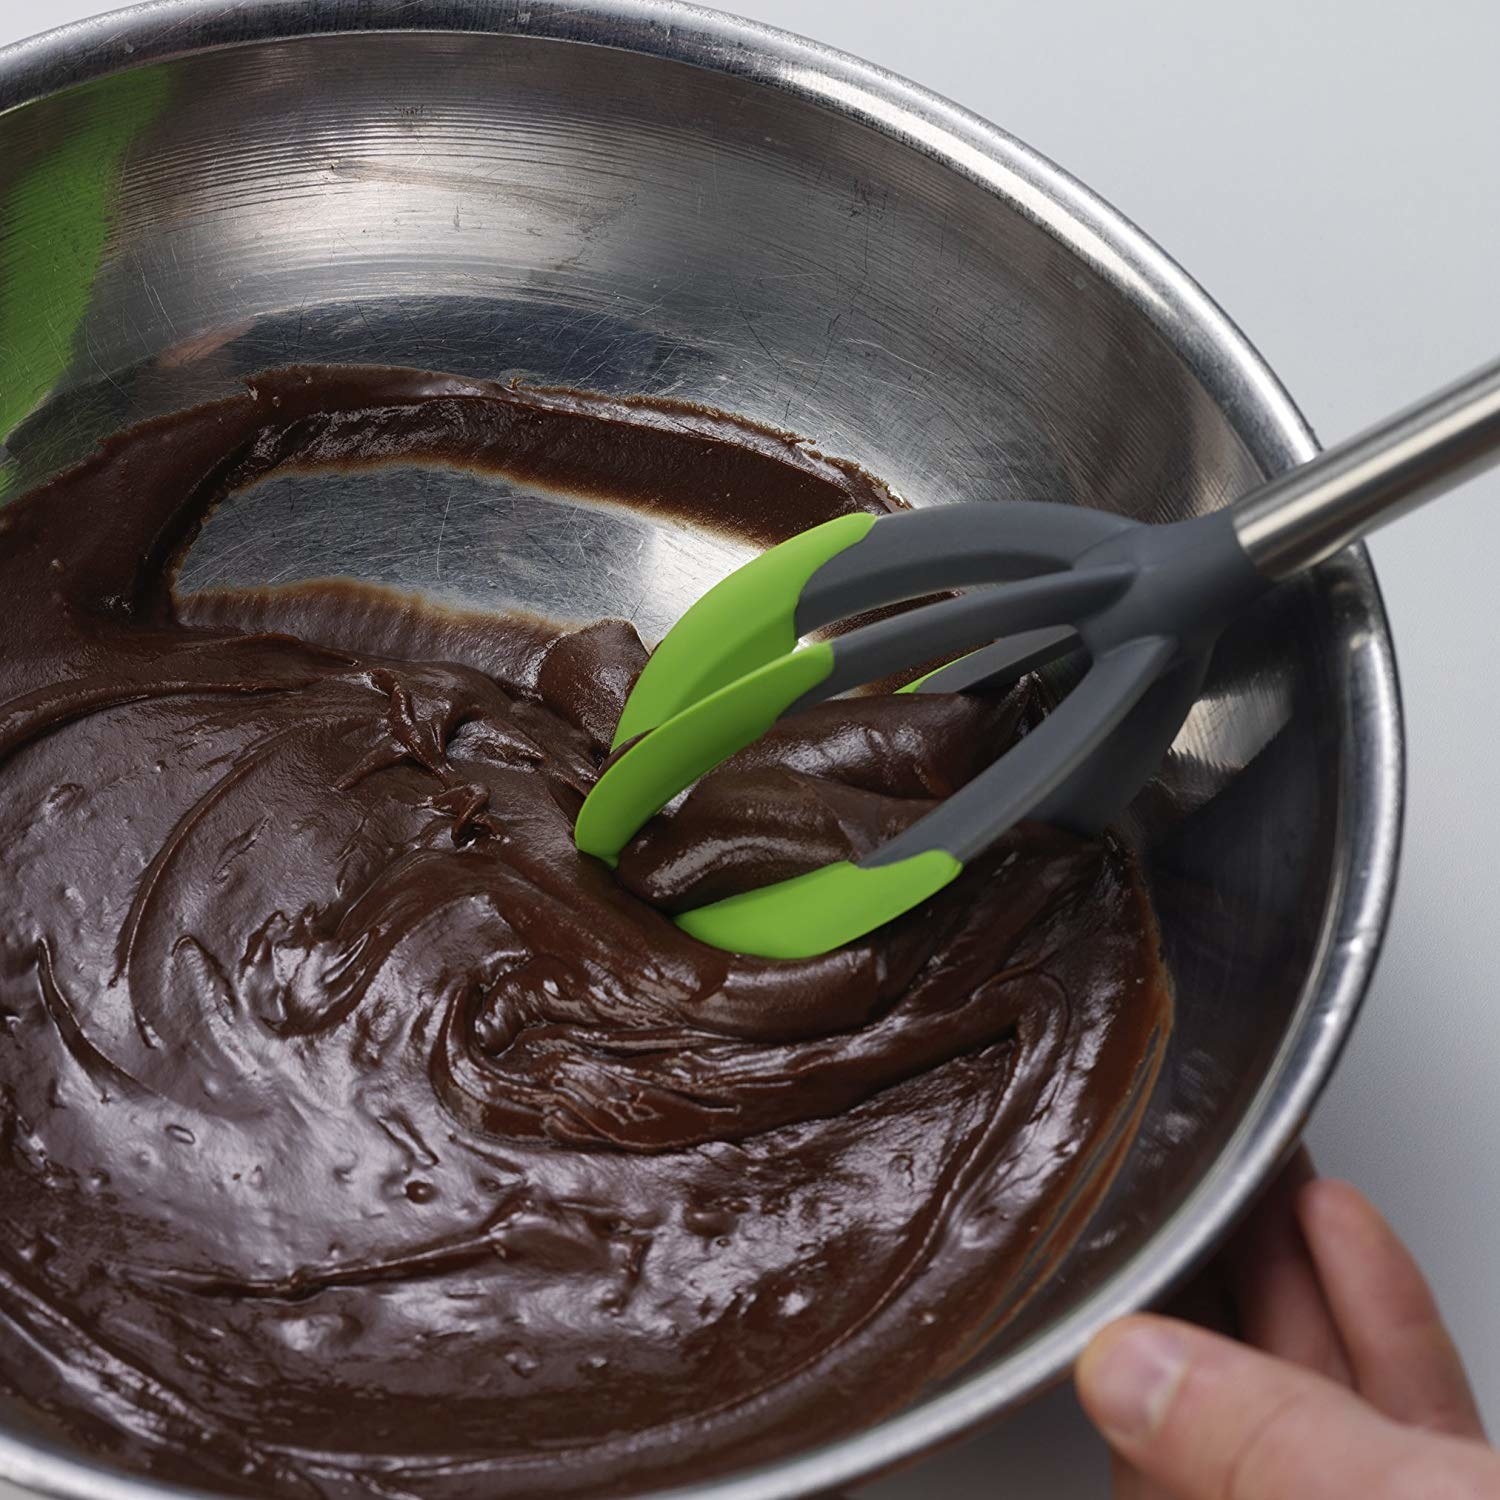 A person using a whisk-shaped silicone tool to mix chocolate batter